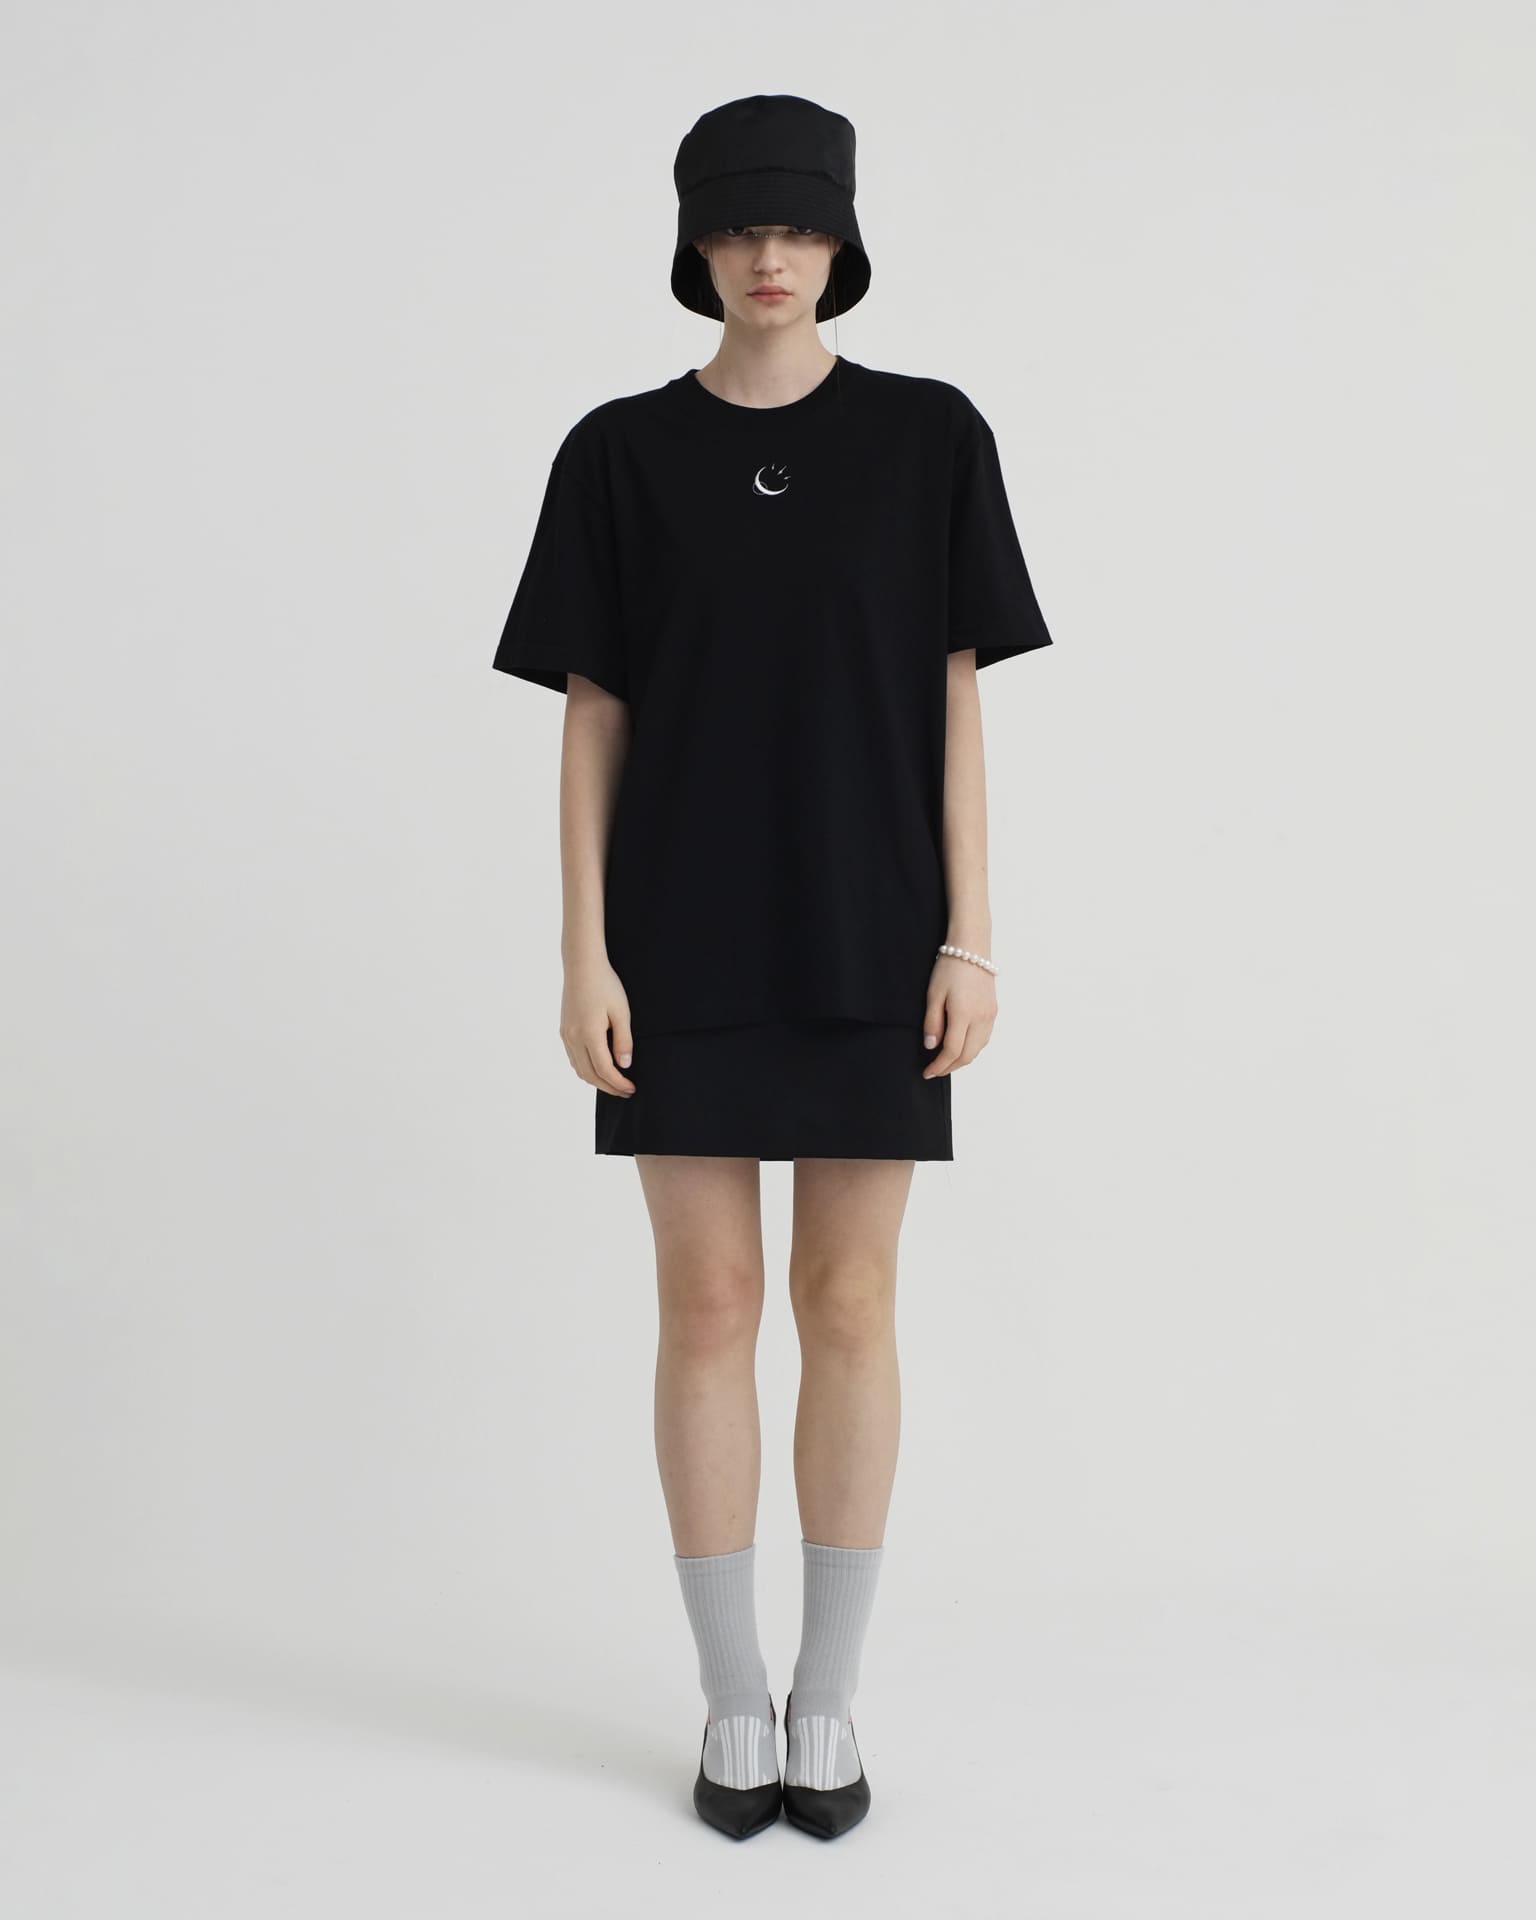 Spctra_Embroidered T-Shirt Black